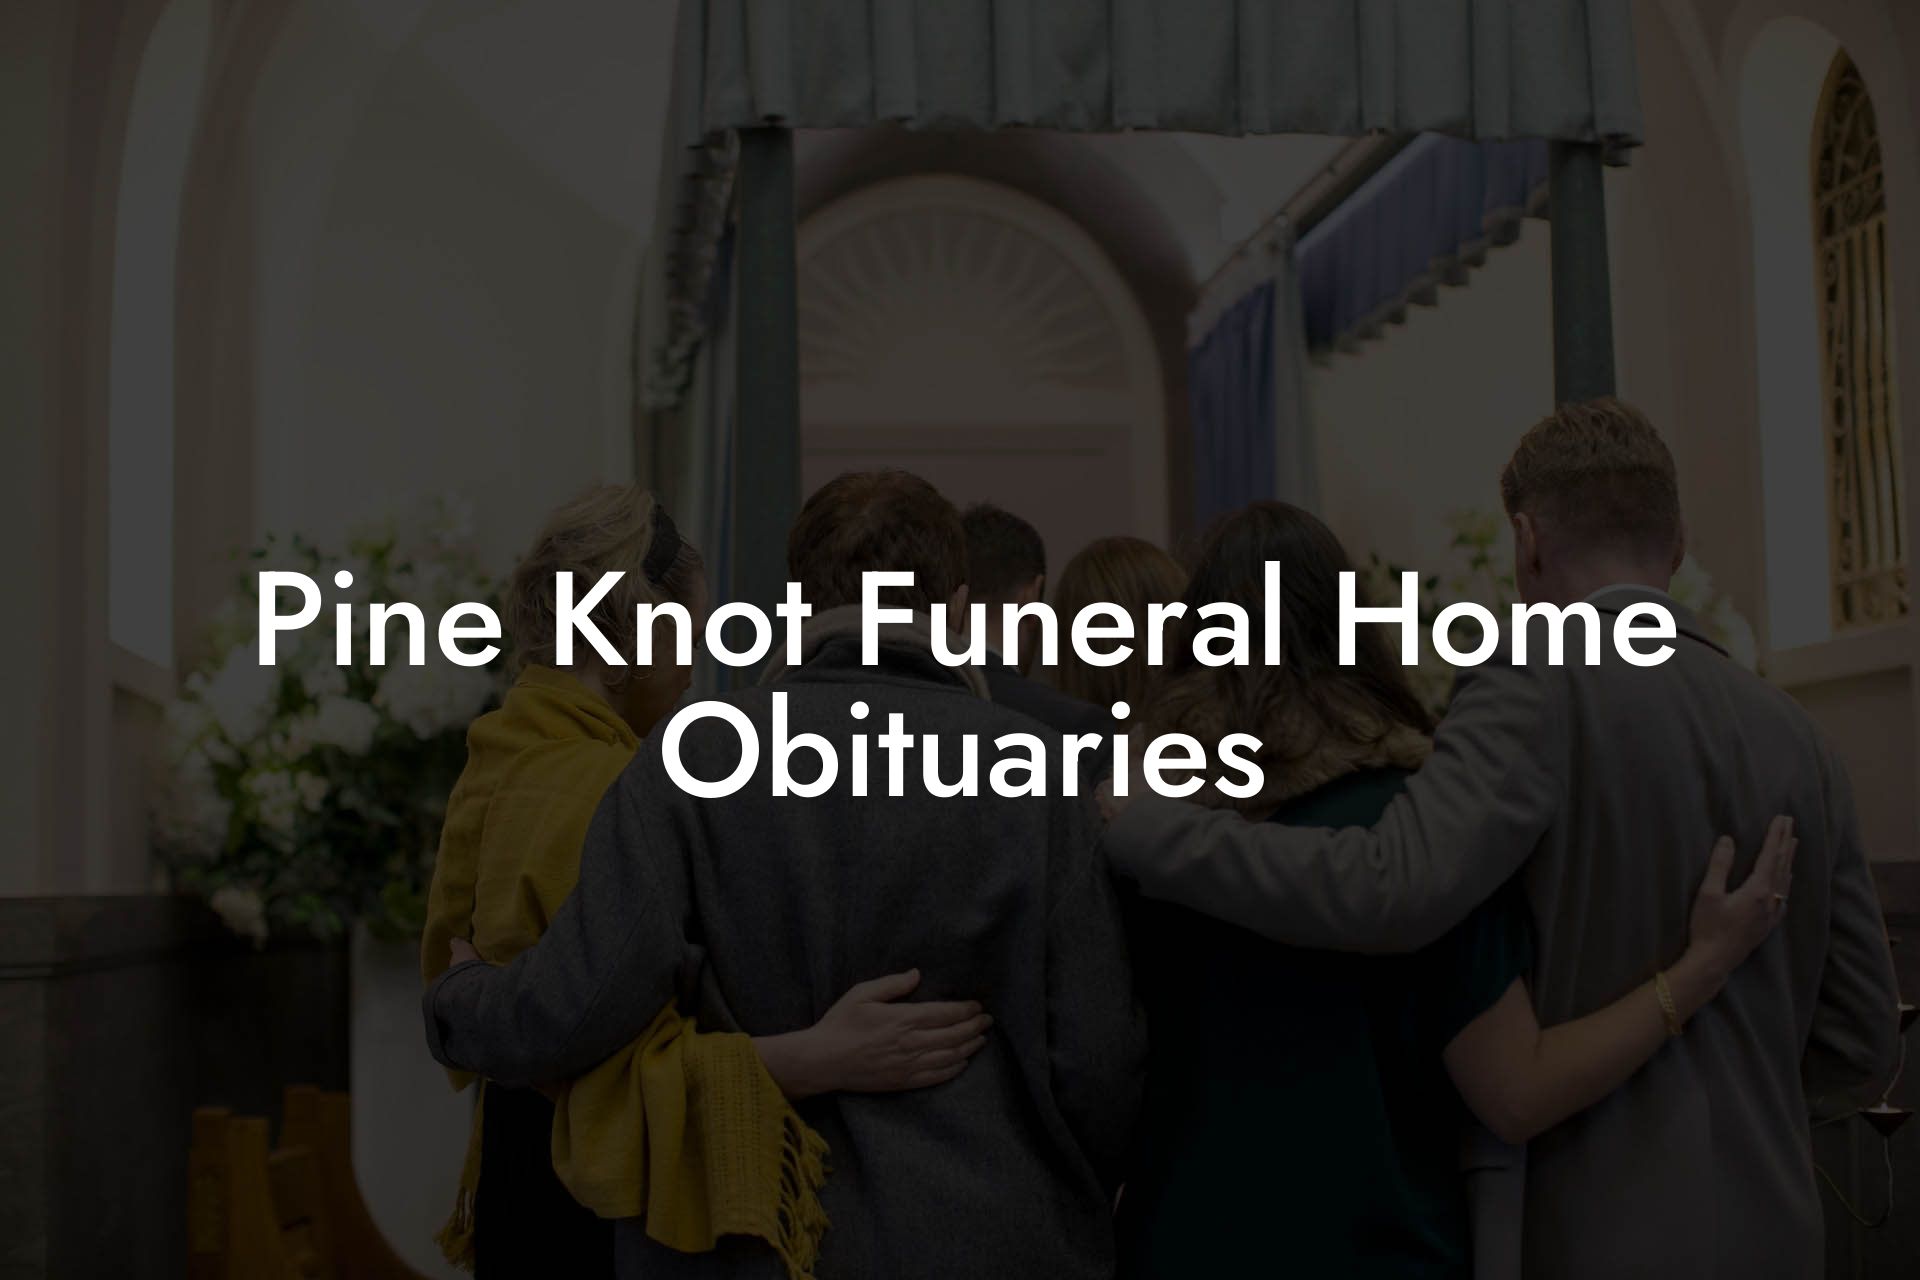 Pine Knot Funeral Home Obituaries